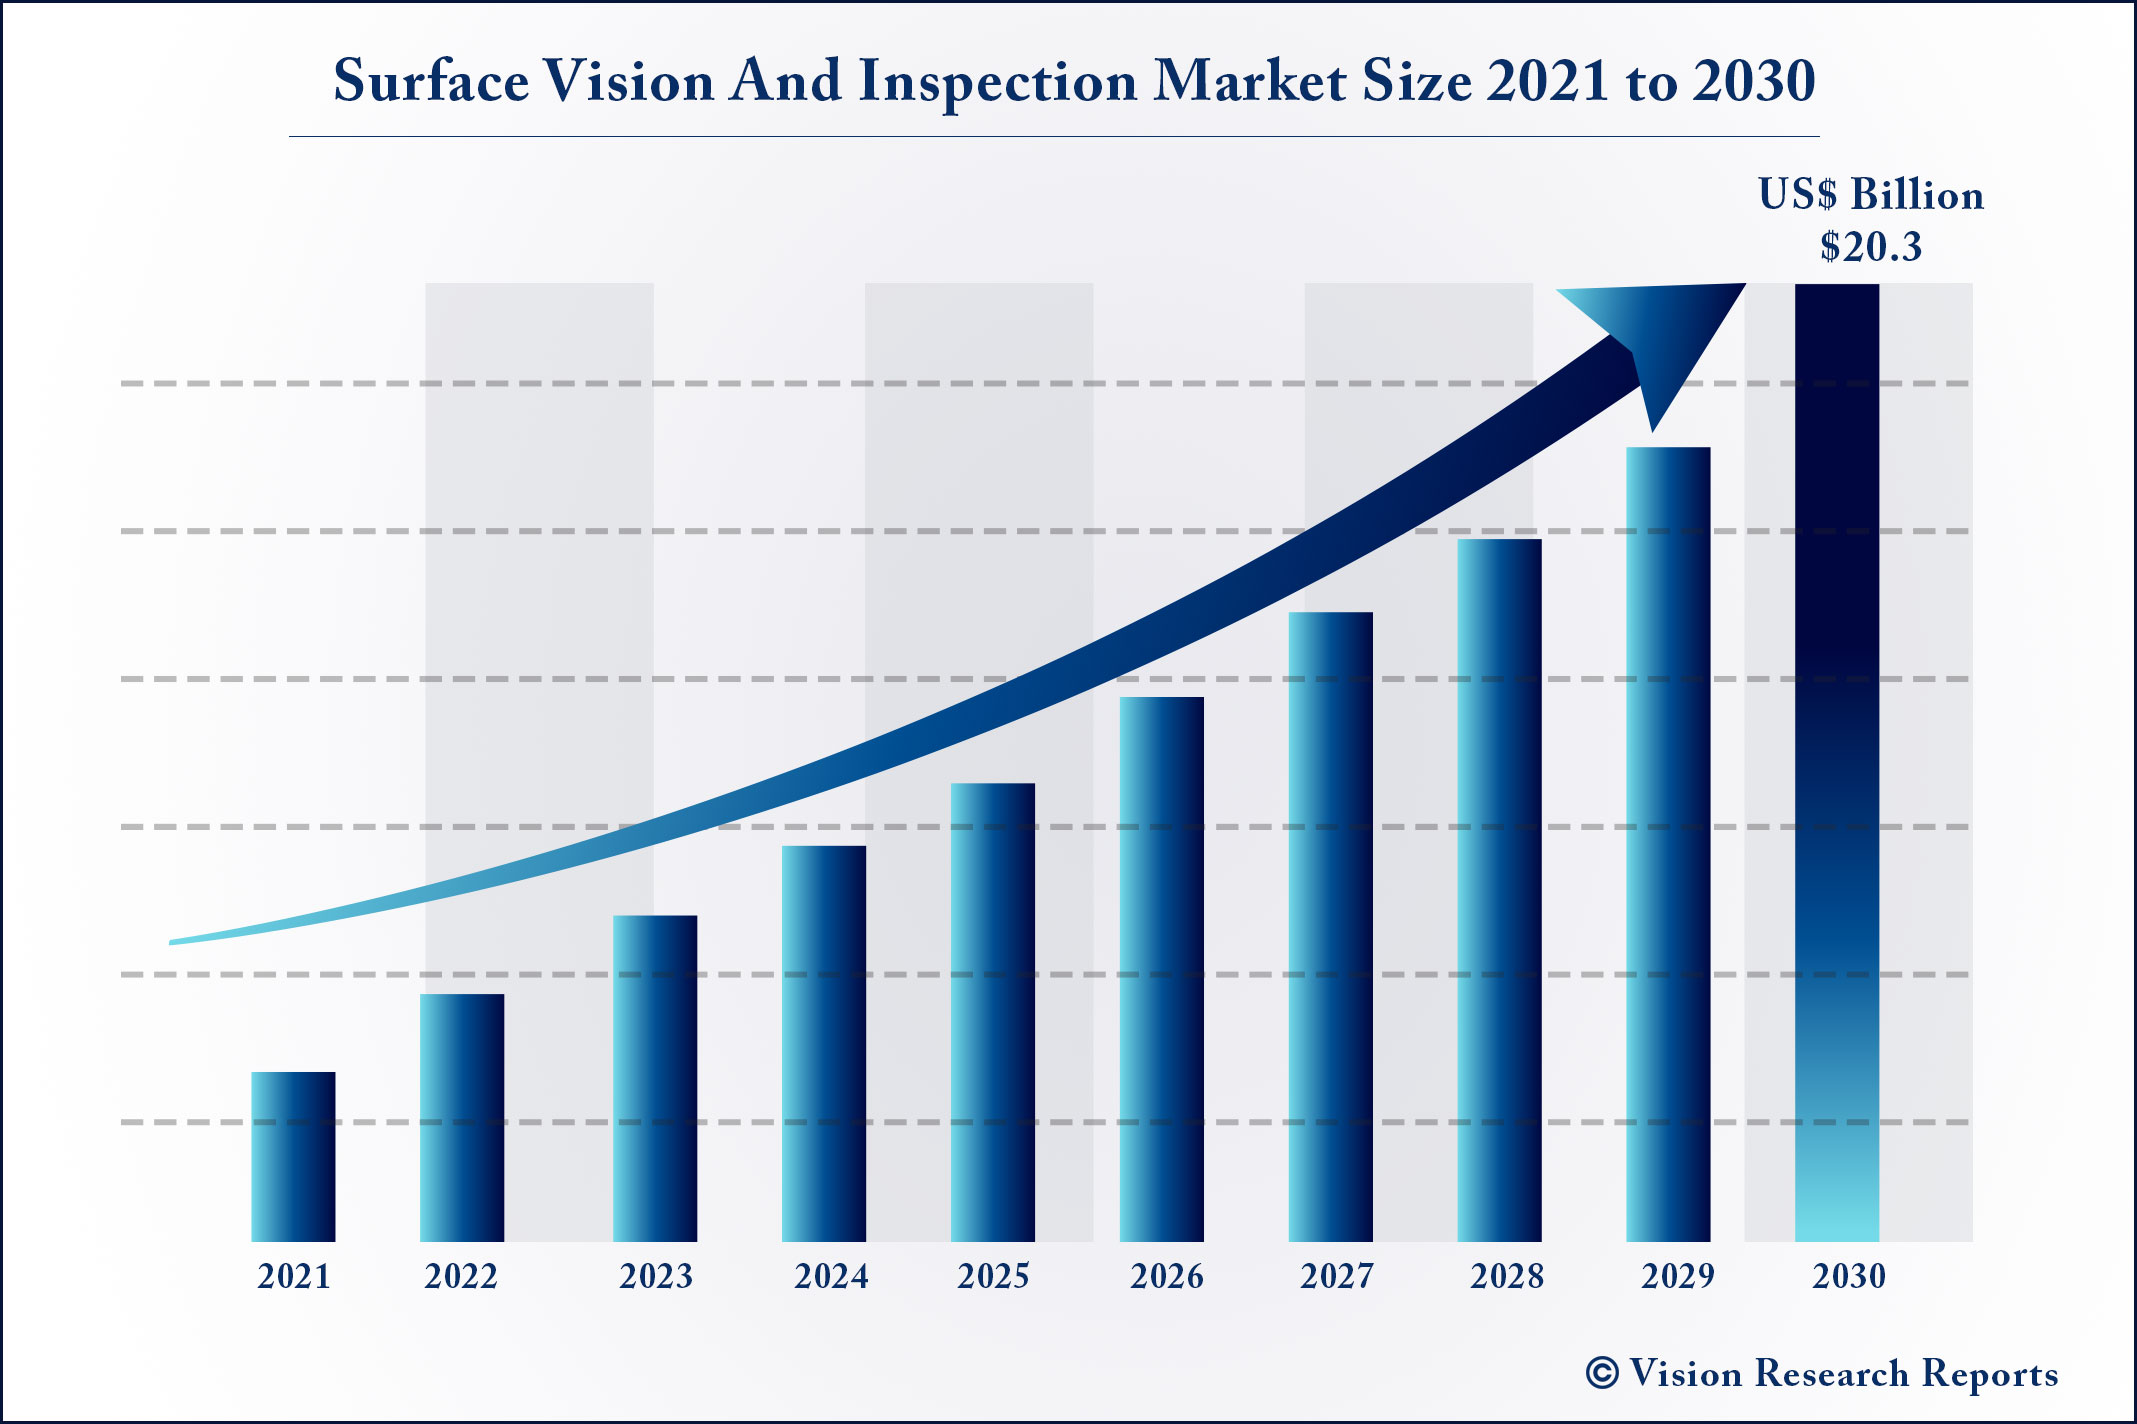 Surface Vision And Inspection Market Size 2021 to 2030